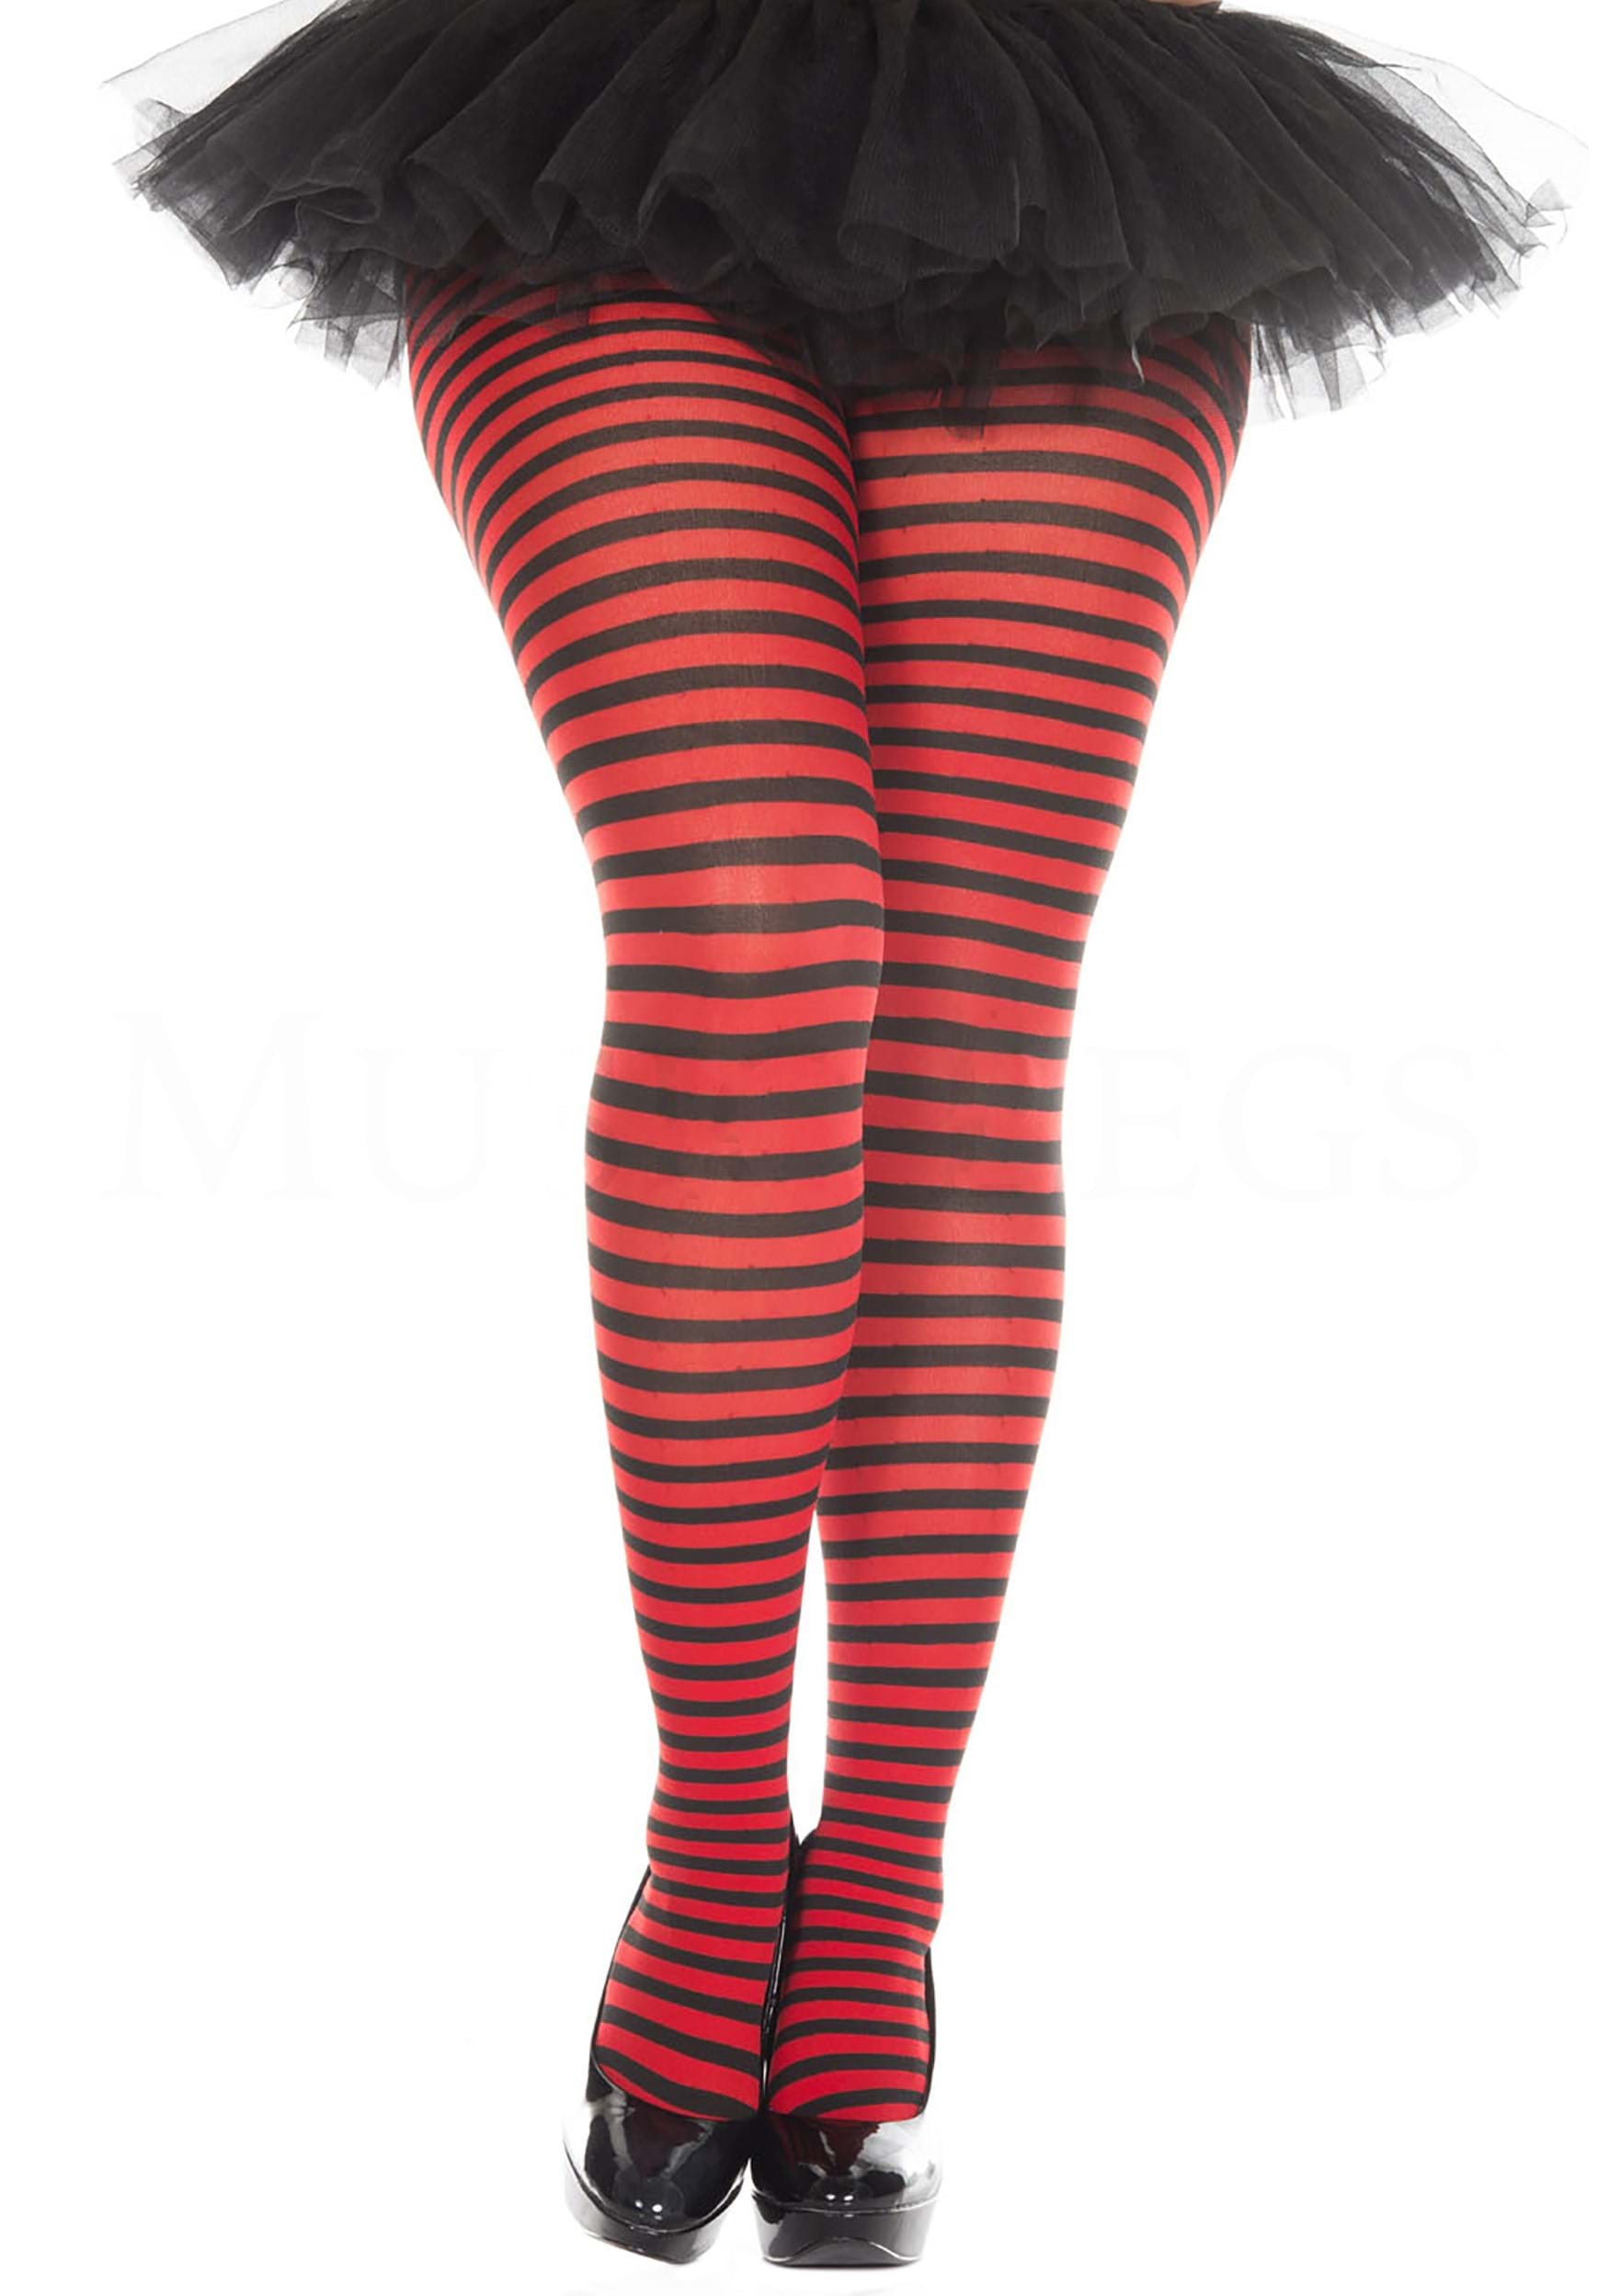 Women's Plus Black and Red Striped Stockings